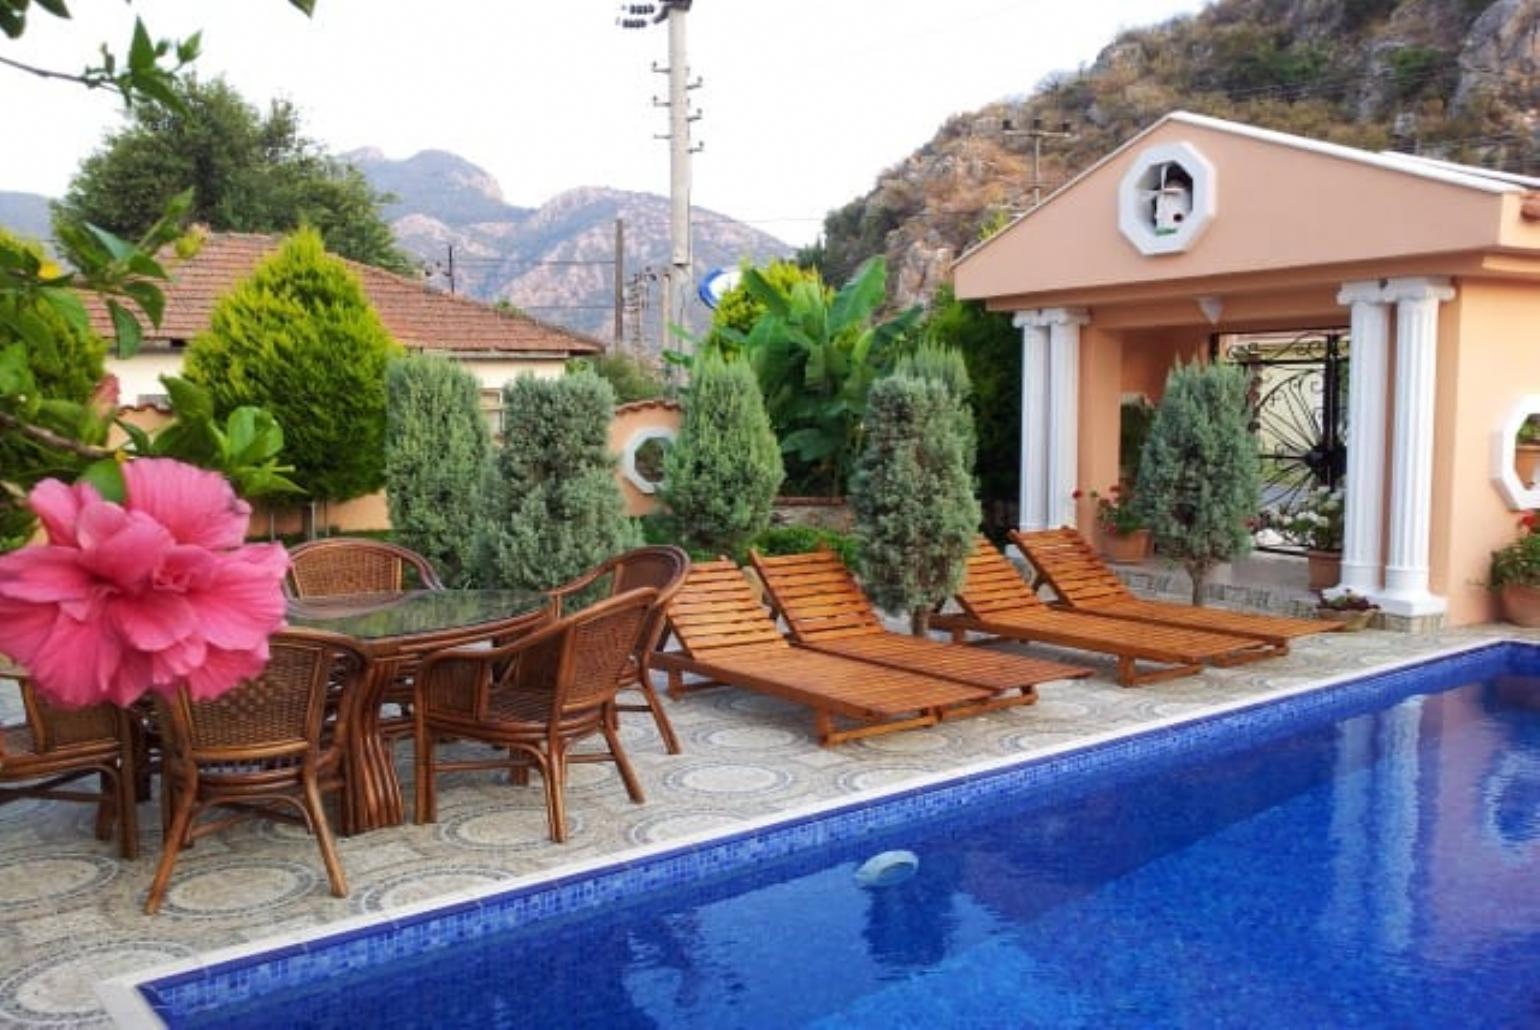 Beautiful private villa with private pool, dining area and garden